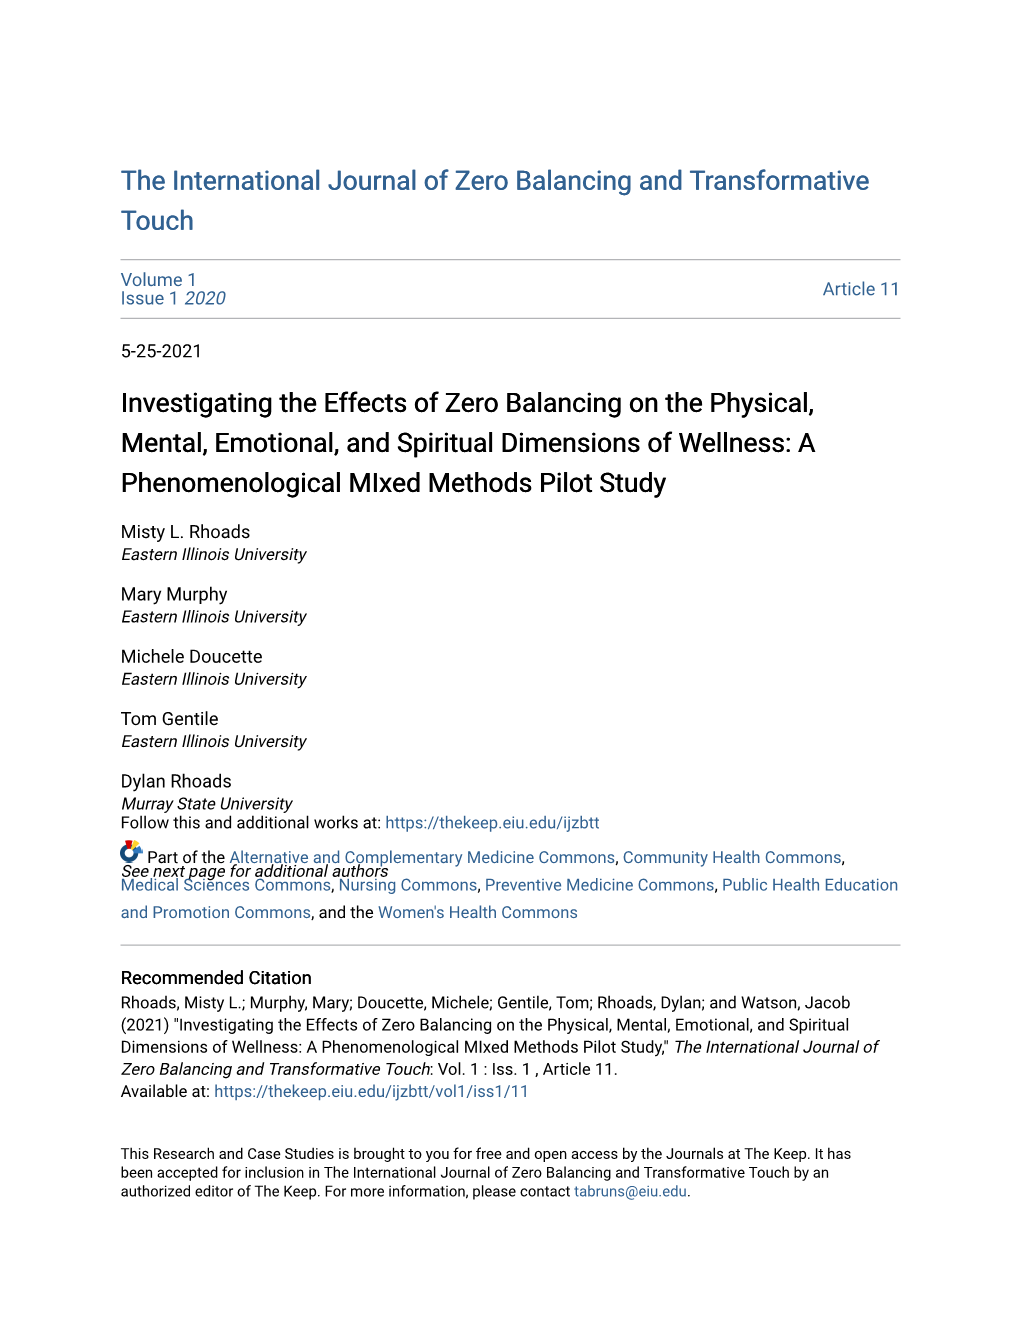 Investigating the Effects of Zero Balancing on the Physical, Mental, Emotional, and Spiritual Dimensions of Wellness: a Phenomenological Mixed Methods Pilot Study